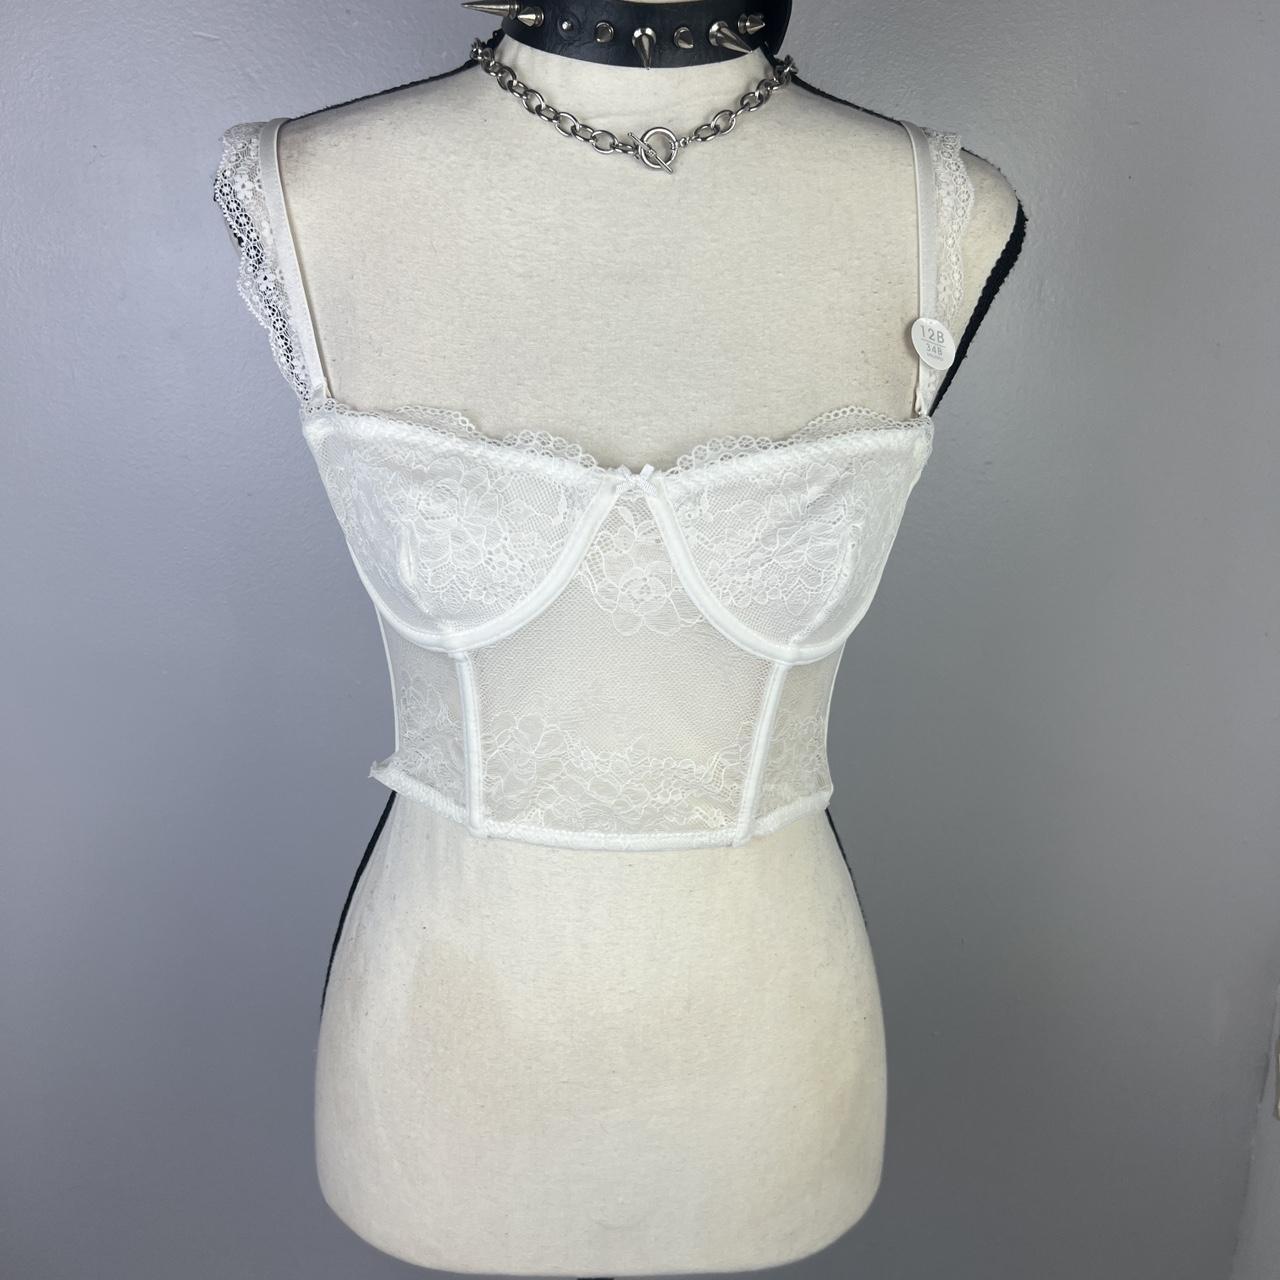 Nala lace unlined bustier from cotton on, New with